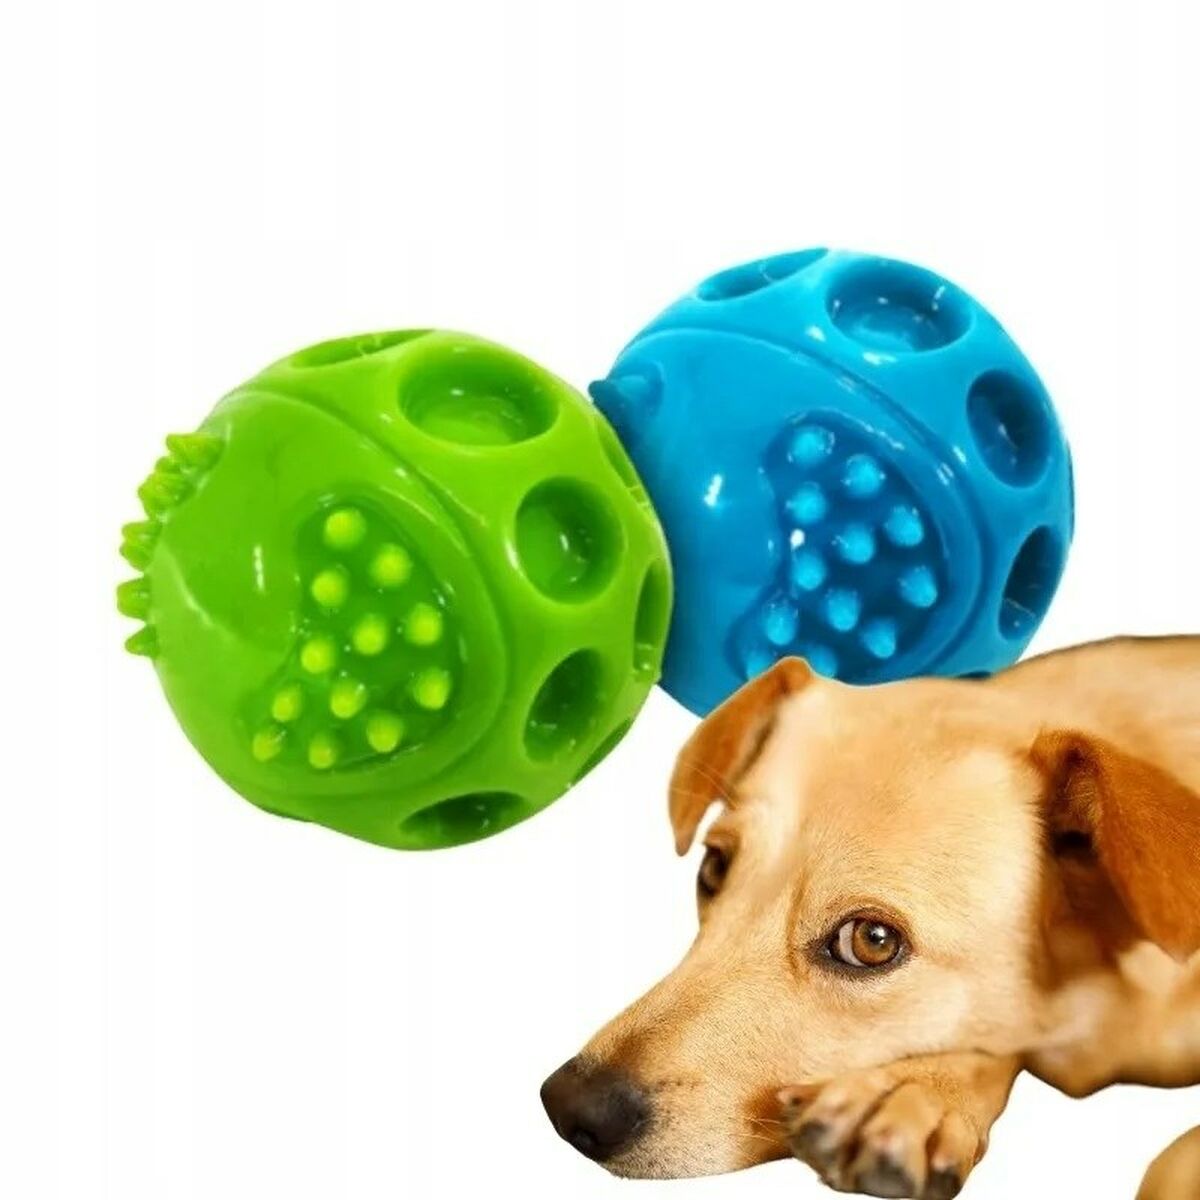 Dog toy Hilton 104-404012-00 Blue Green Natural rubber (1 Piece)